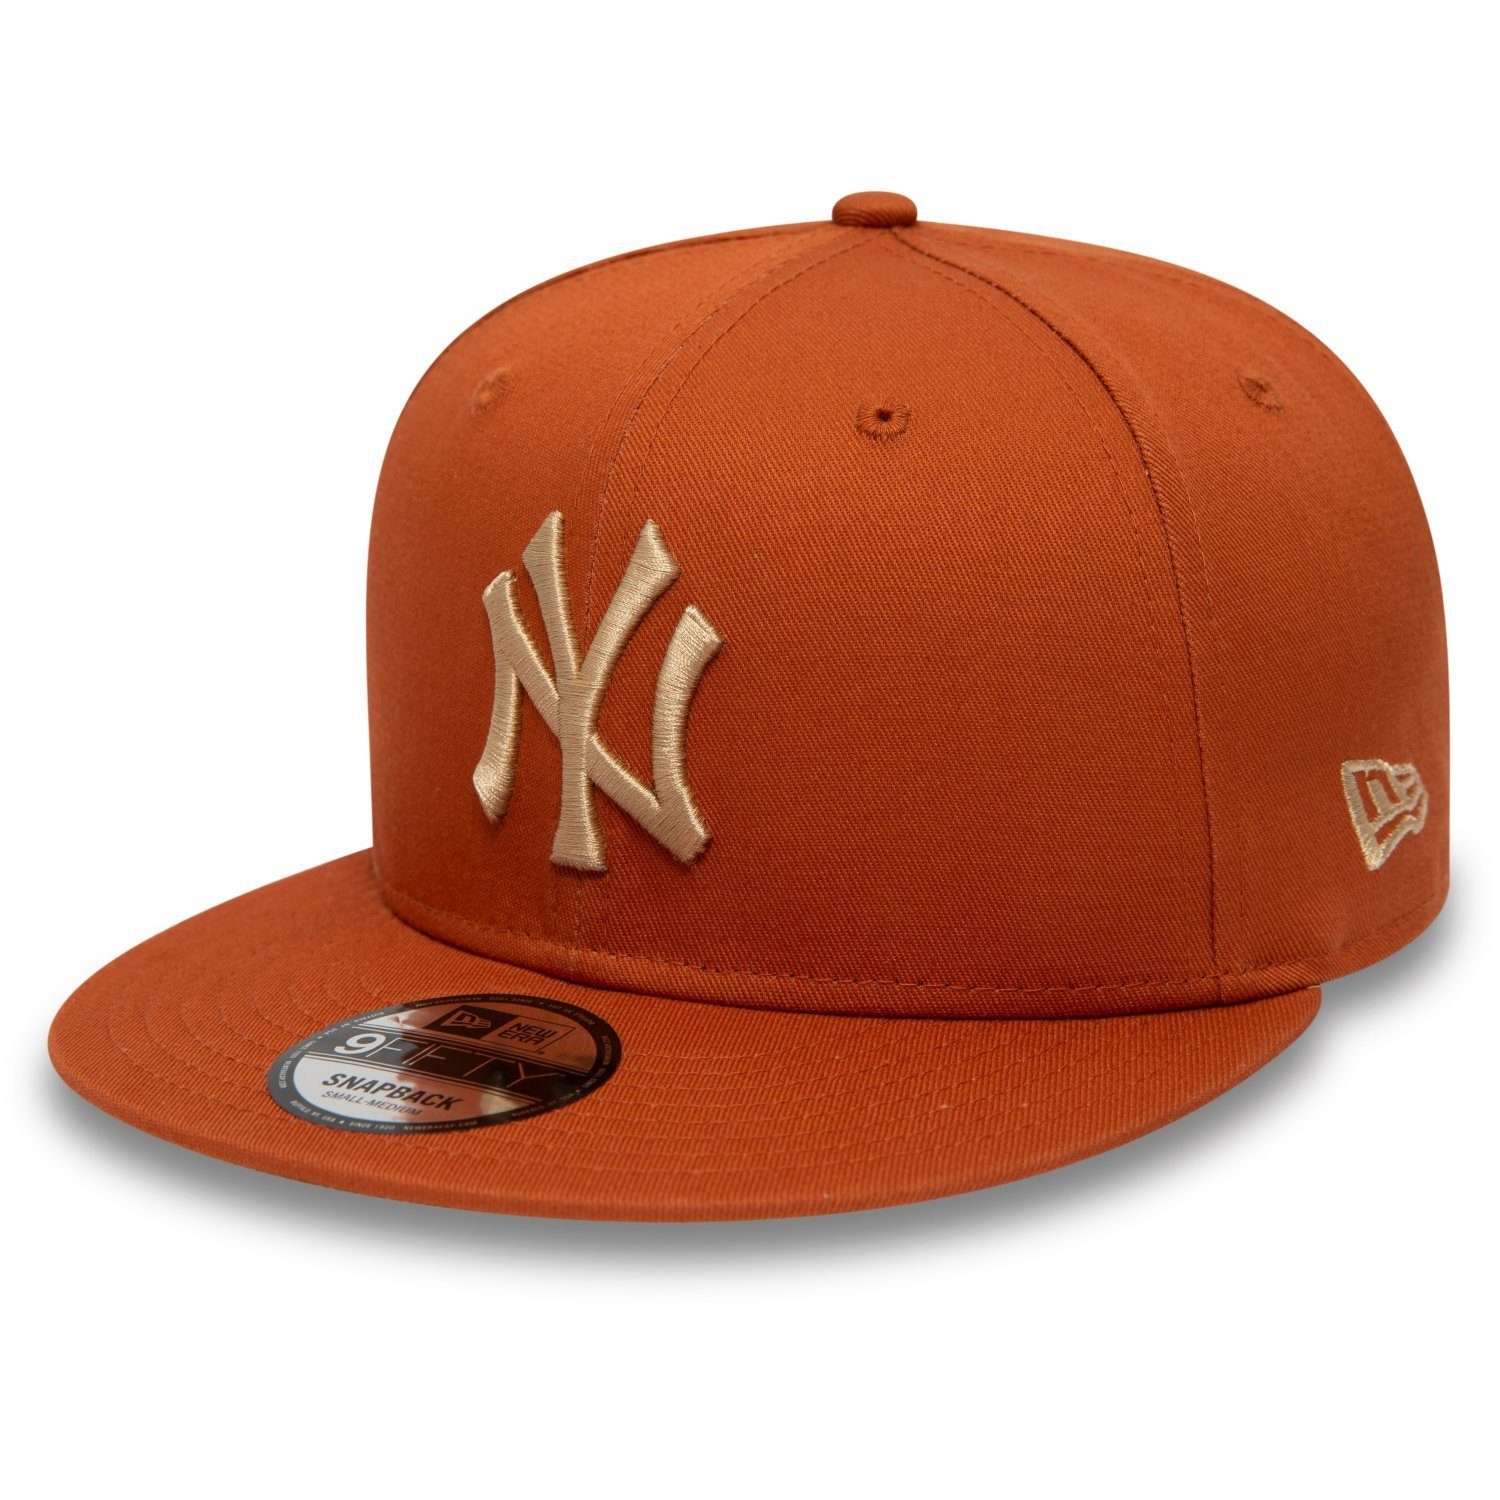 New Era Snapback rost PATCH New SIDE York Yankees Cap 9Fifty